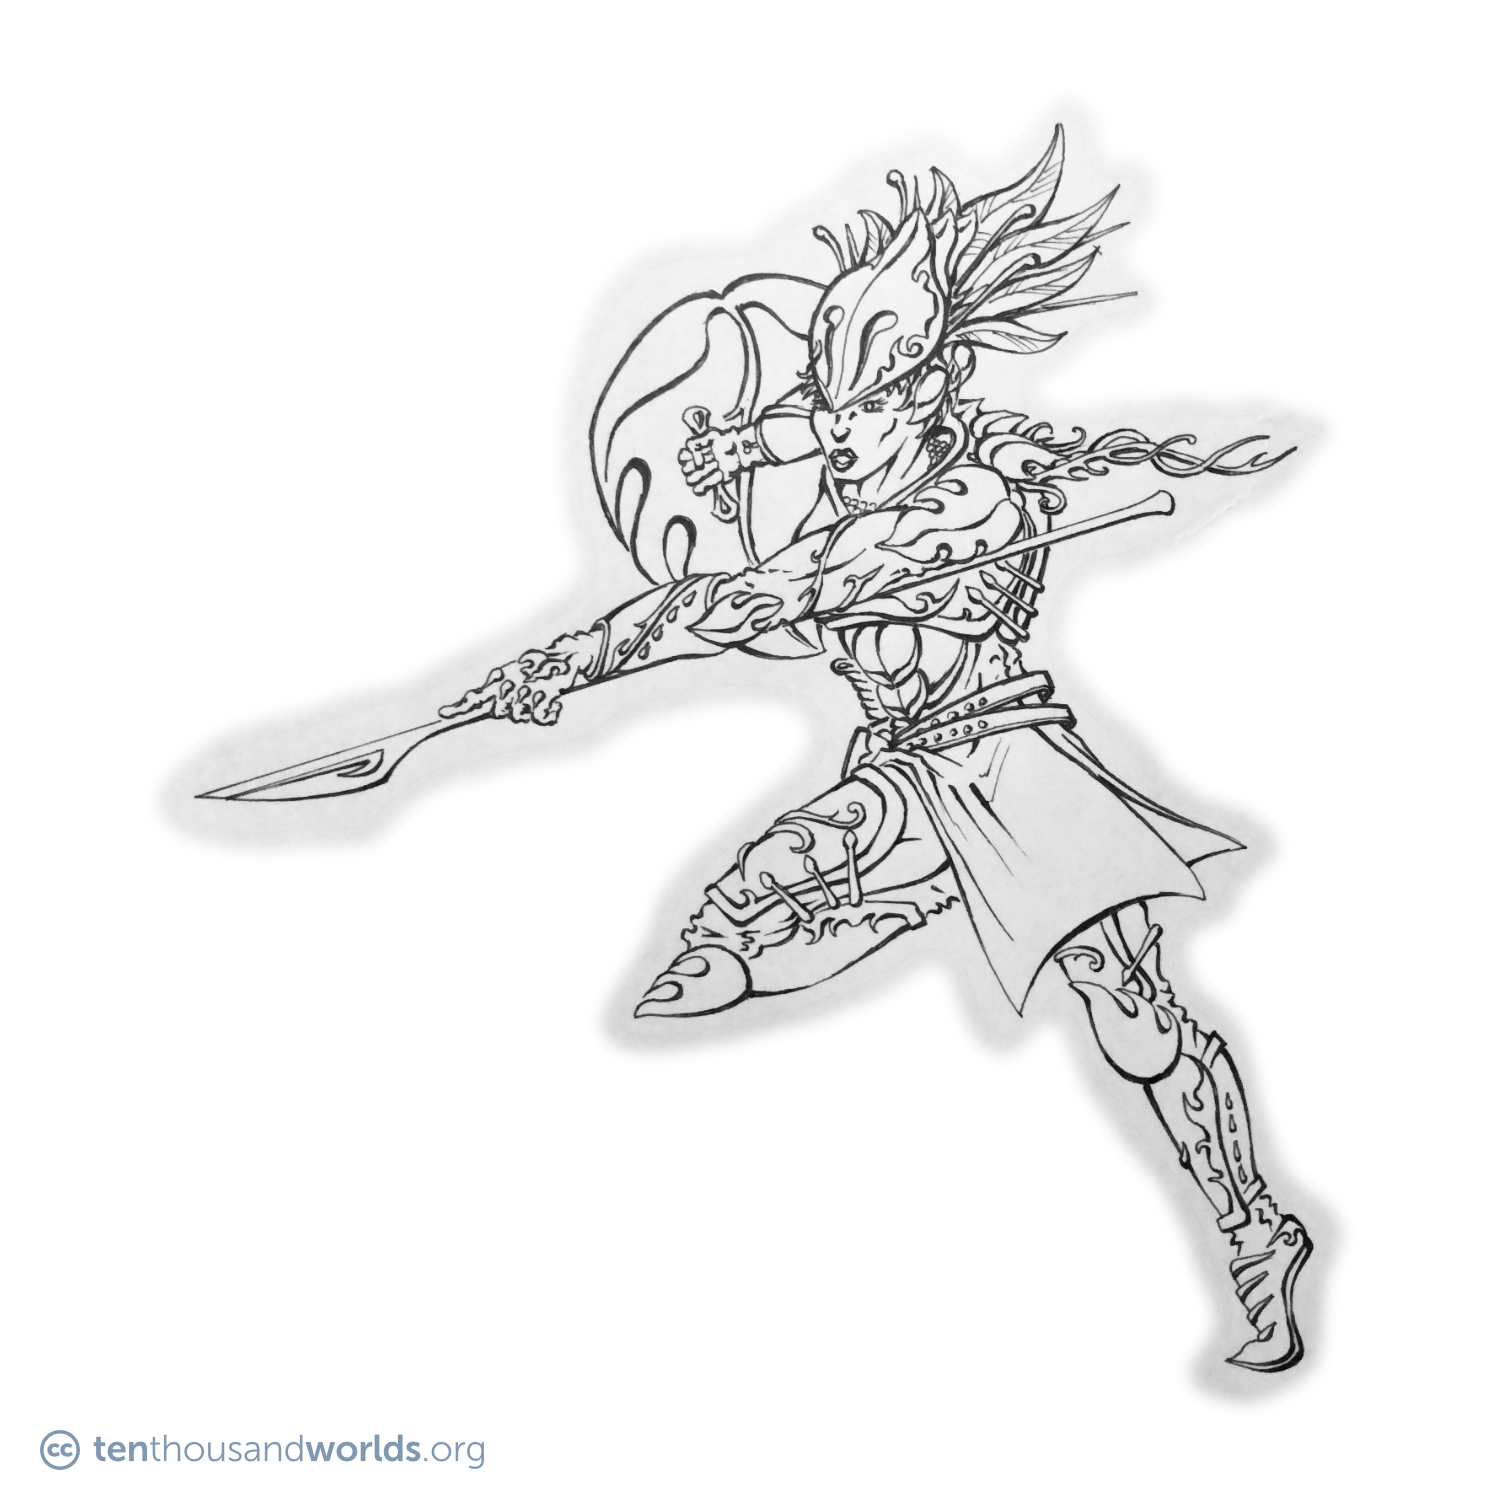 An ink outline of a charging warrior holding a shield and spear, in a feathered helmet and armor adorned with leaf and vine designs.